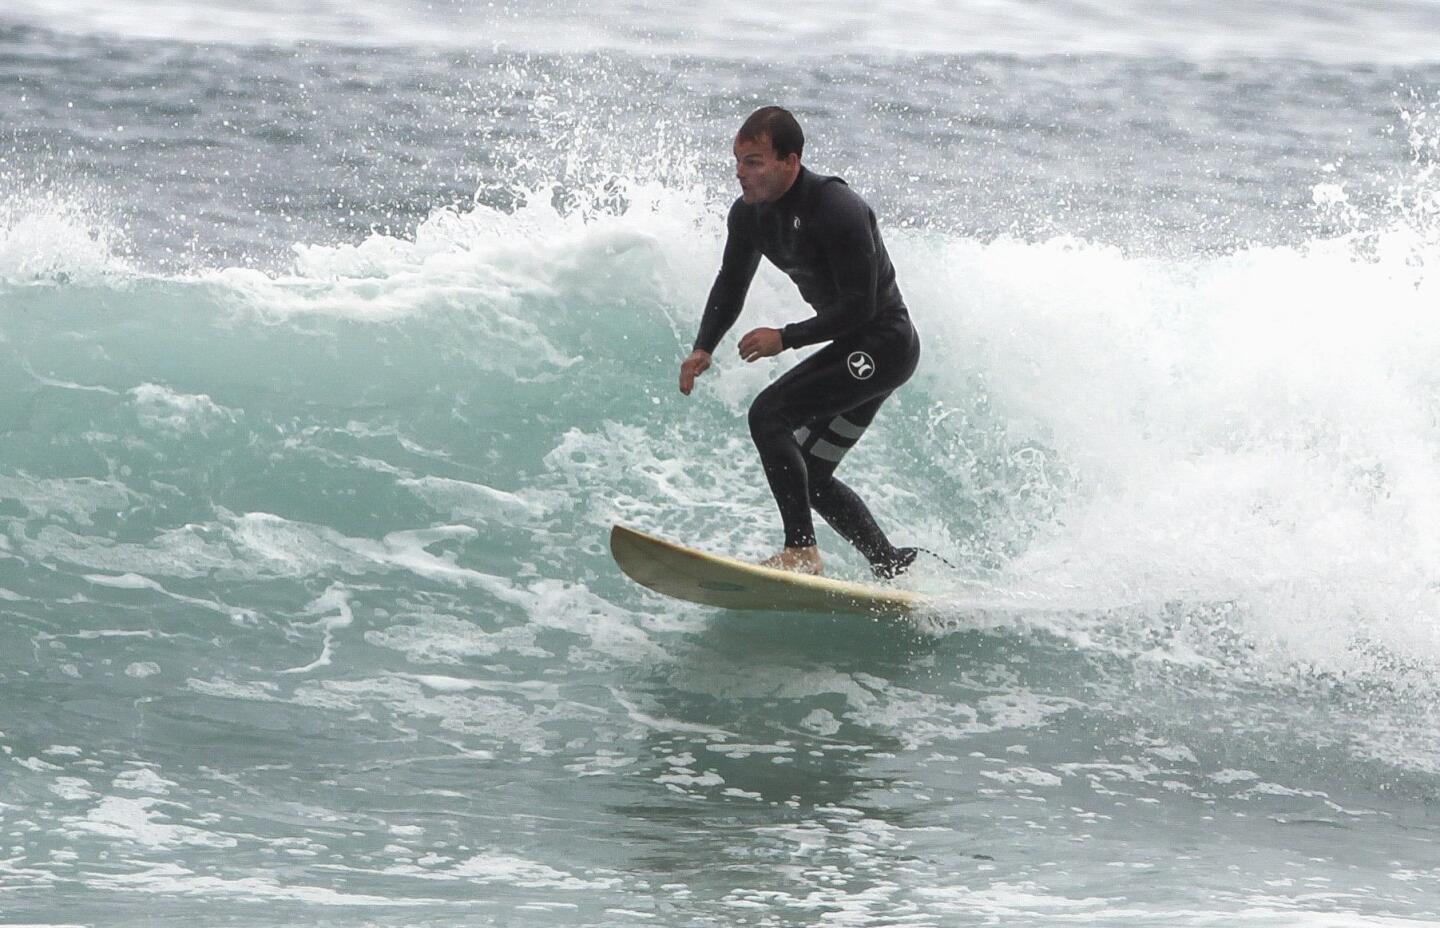 After kinesiology students placed eight sensors, or thermistors, used to measure skin temperature, and a heart rate monitor on him, surfer James Petracca, 27, who volunteered to participate in the CSUSM surf study, rides a wave at Swamis.